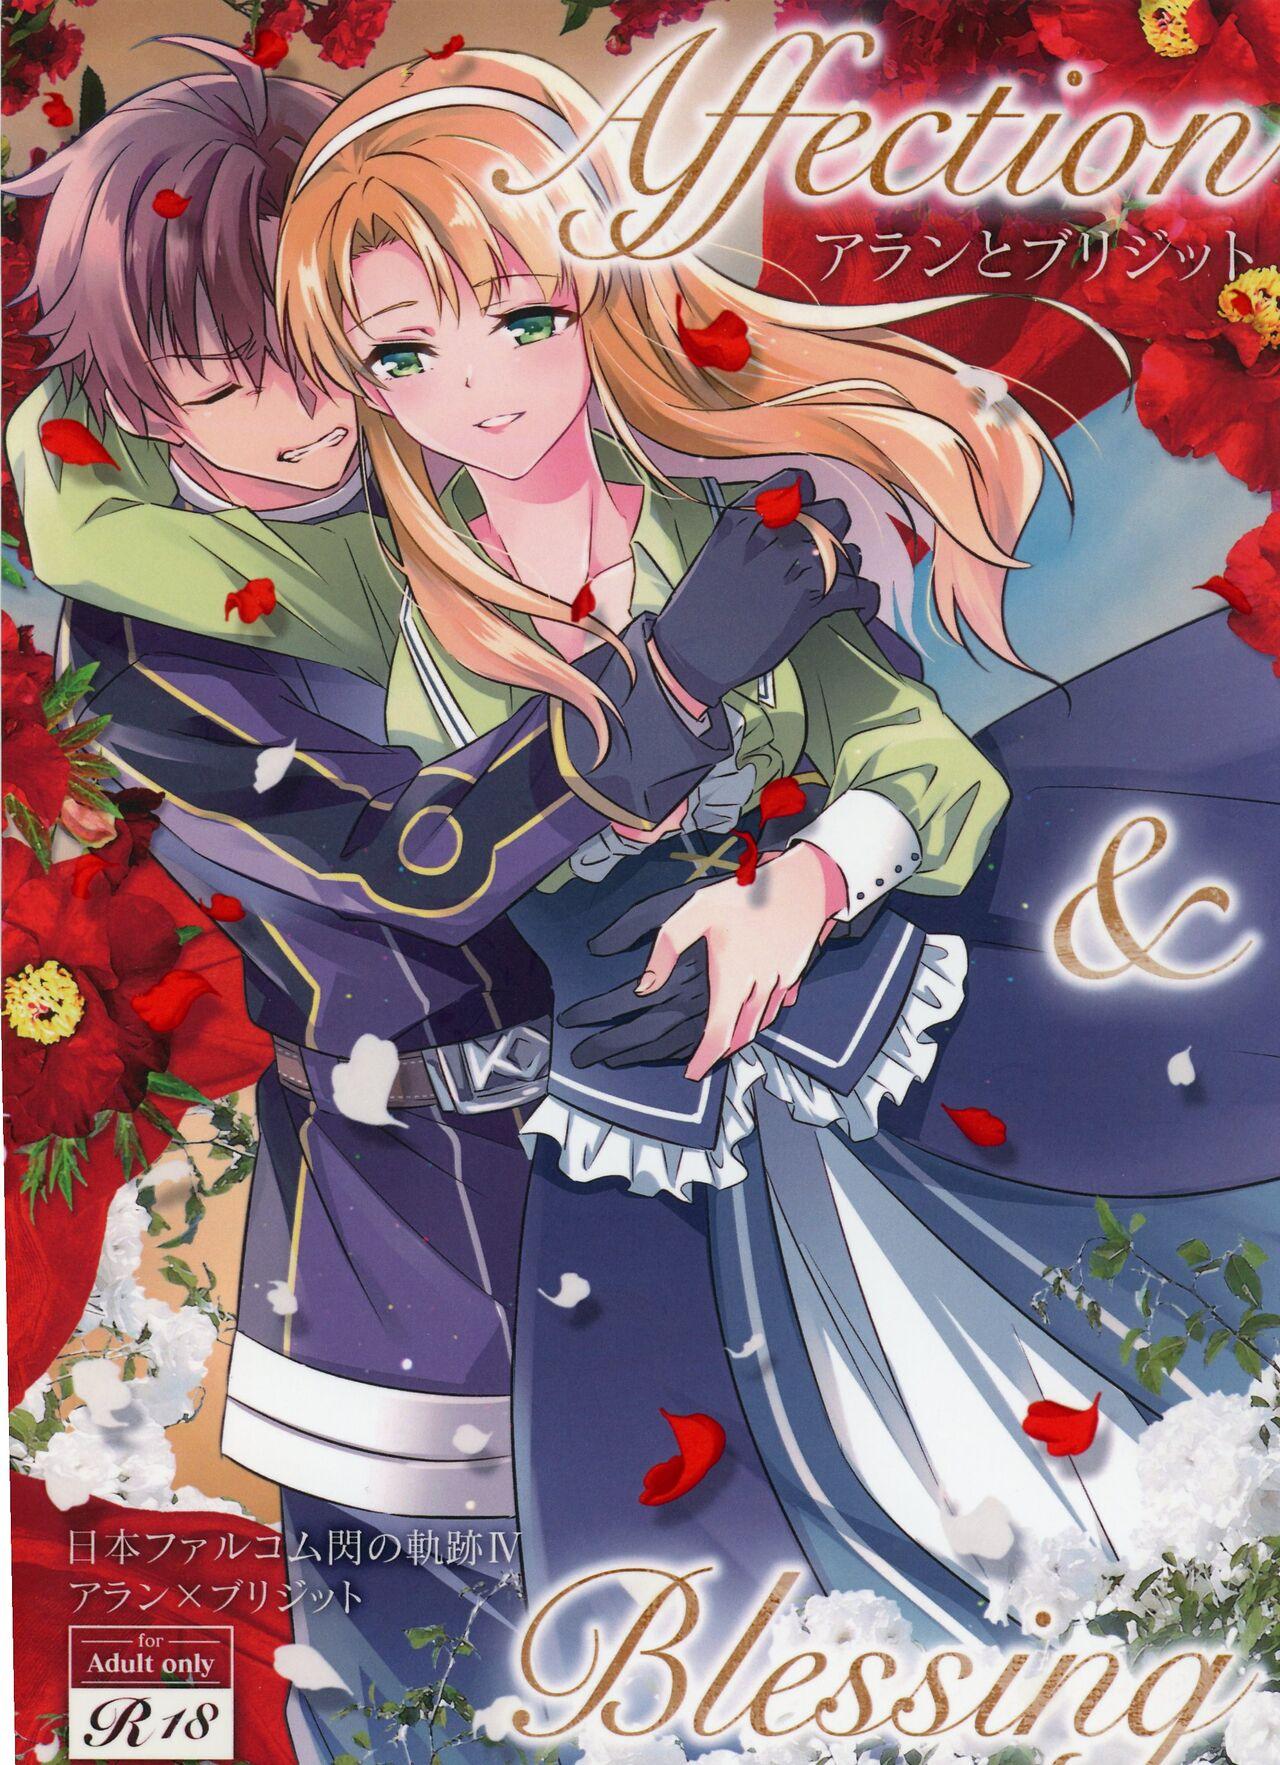 Tribute Affection & Blessing - The legend of heroes | eiyuu densetsu Cum Inside - Page 1